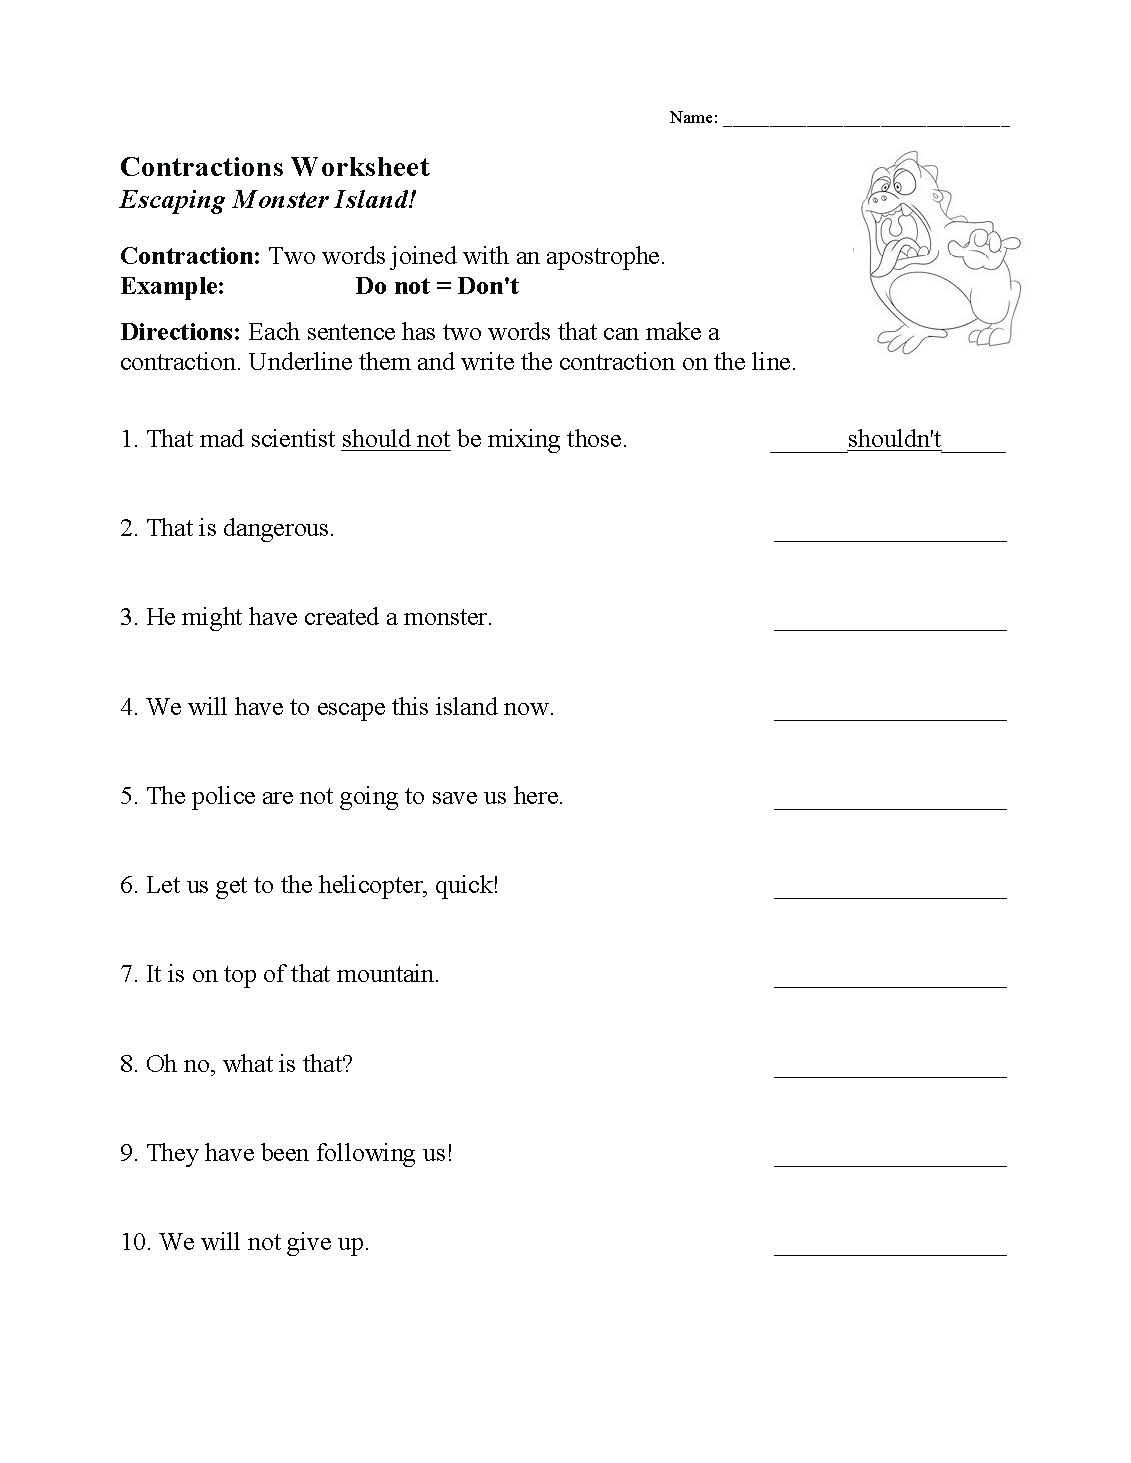 This is a preview image of our Contractions Worksheet. Click on it to enlarge this image and view the source file.